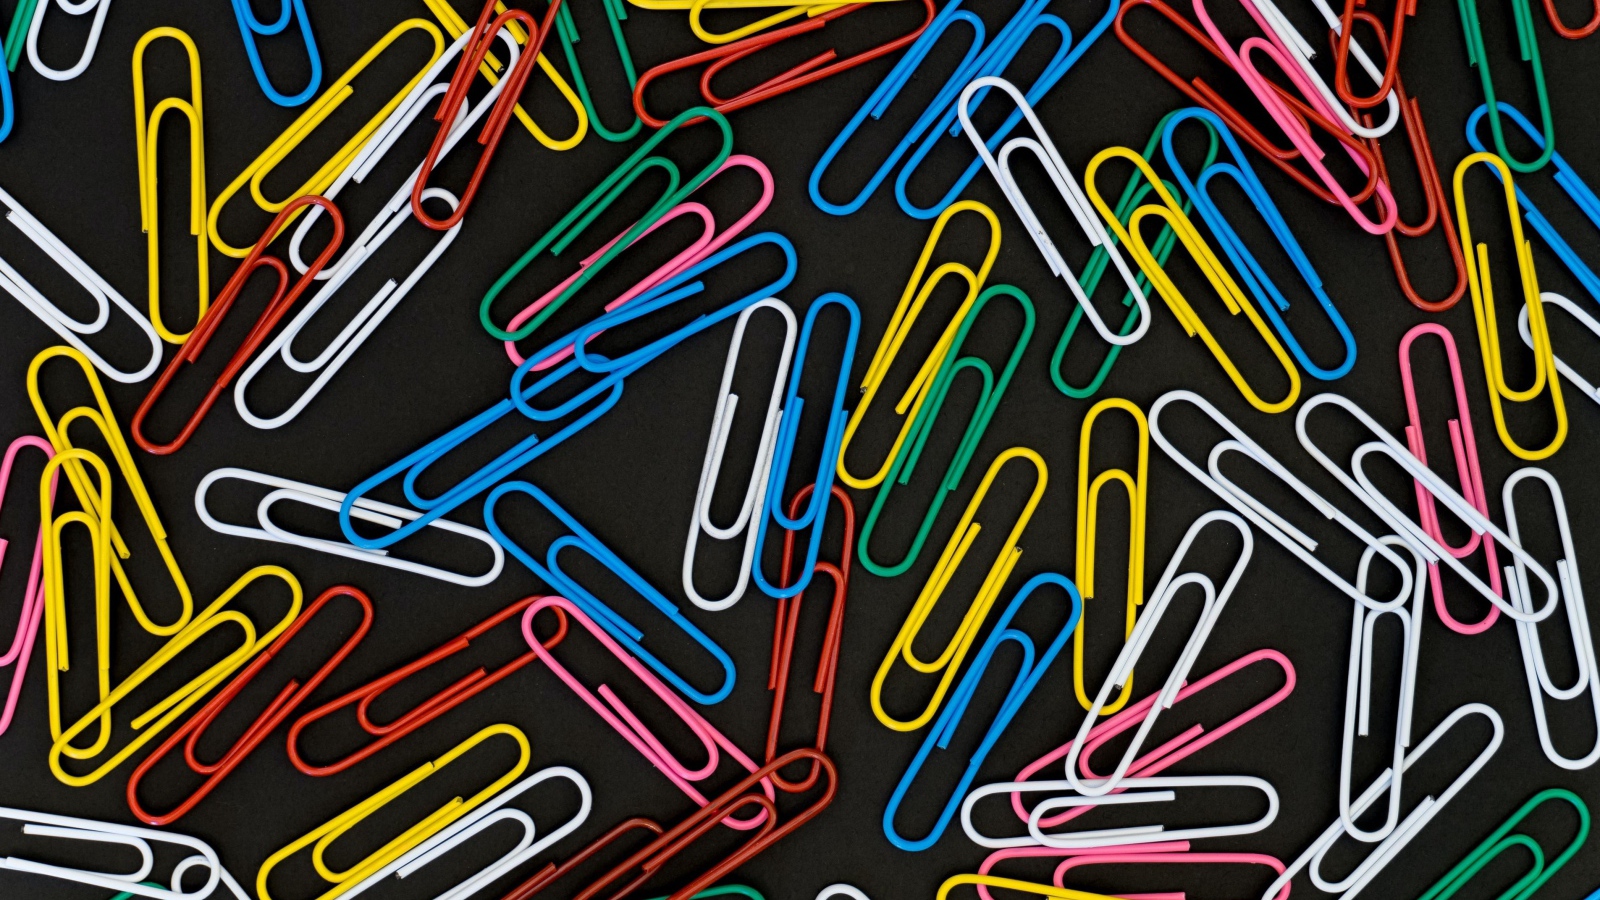 Many multi-colored paper clips on a black background